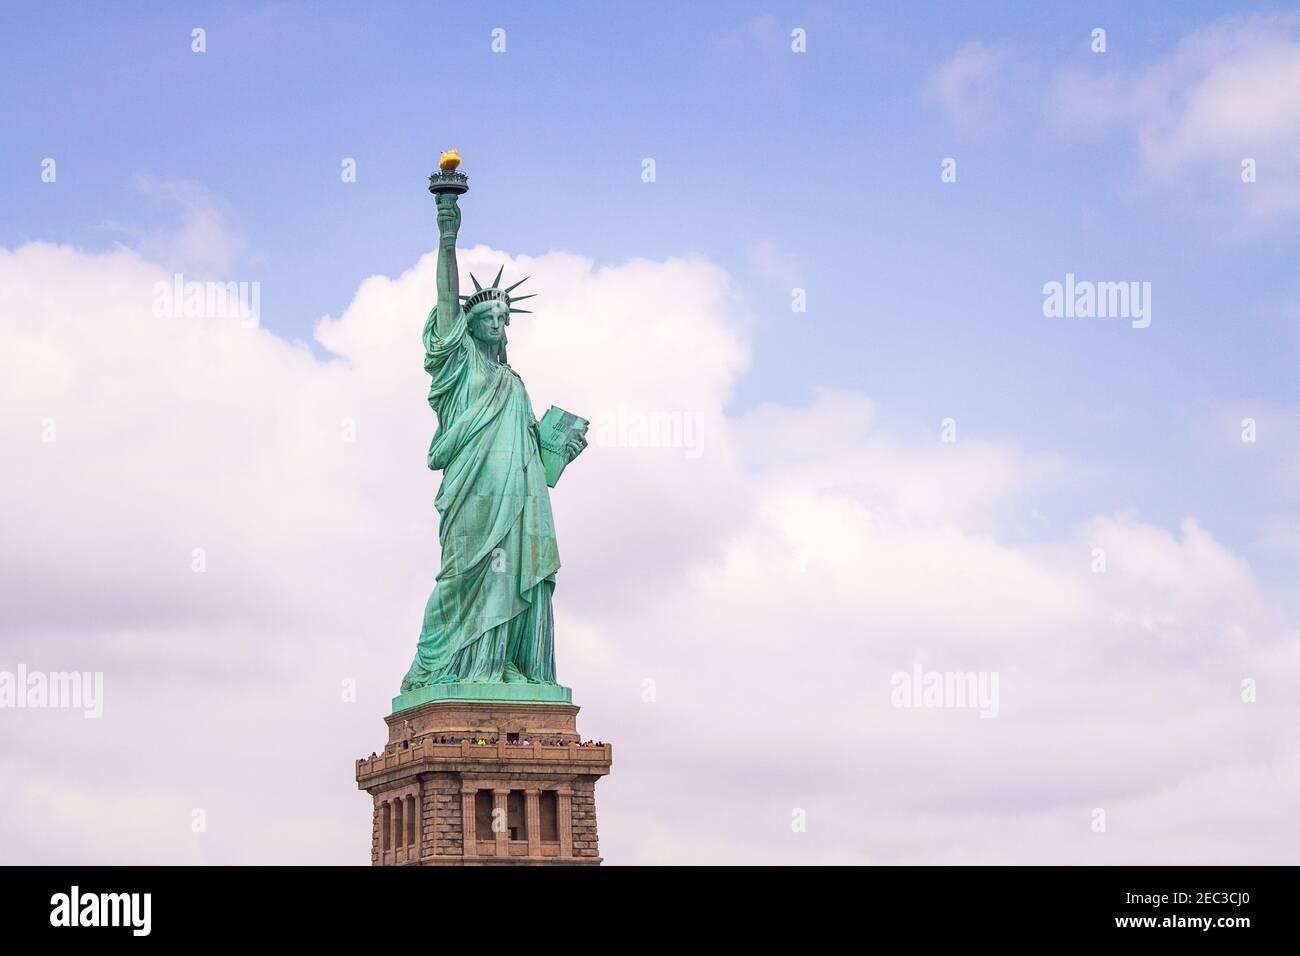 View of the Statue of Liberty in New York from the left front side with the blue cloudy sky in the background Stock Photo